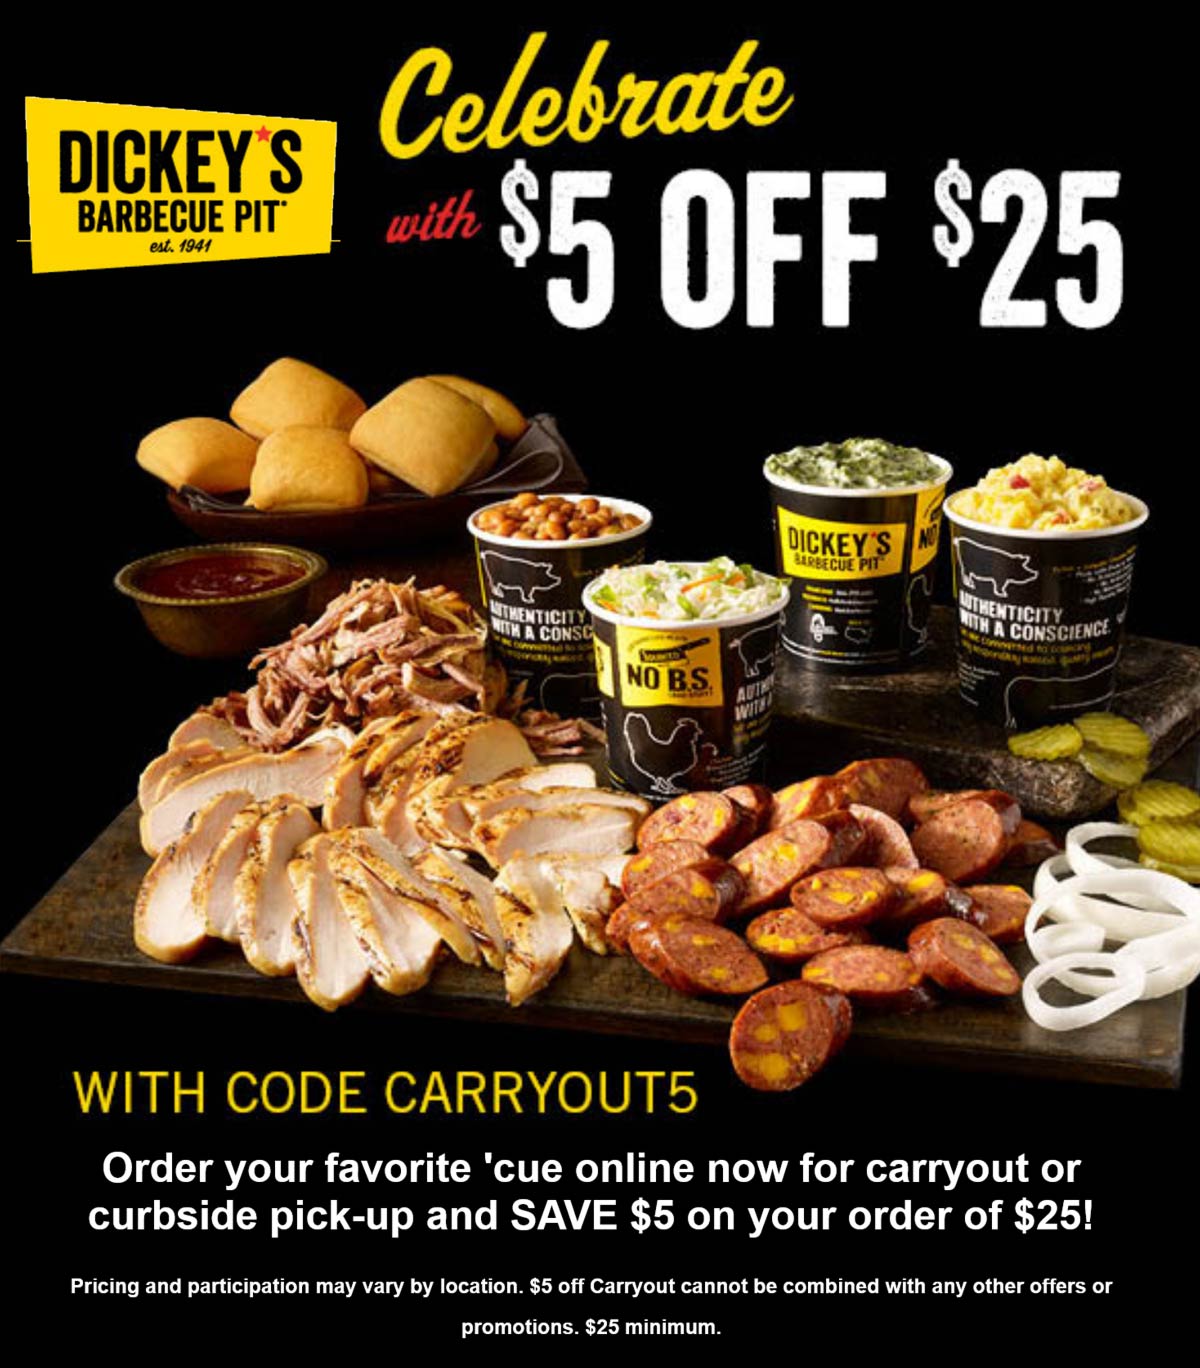 Dickeys Barbecue Pit restaurants Coupon  $5 off $25 at Dickeys Barbecue Pit restaurants via promo code CARRYOUT5 #dickeysbarbecuepit 